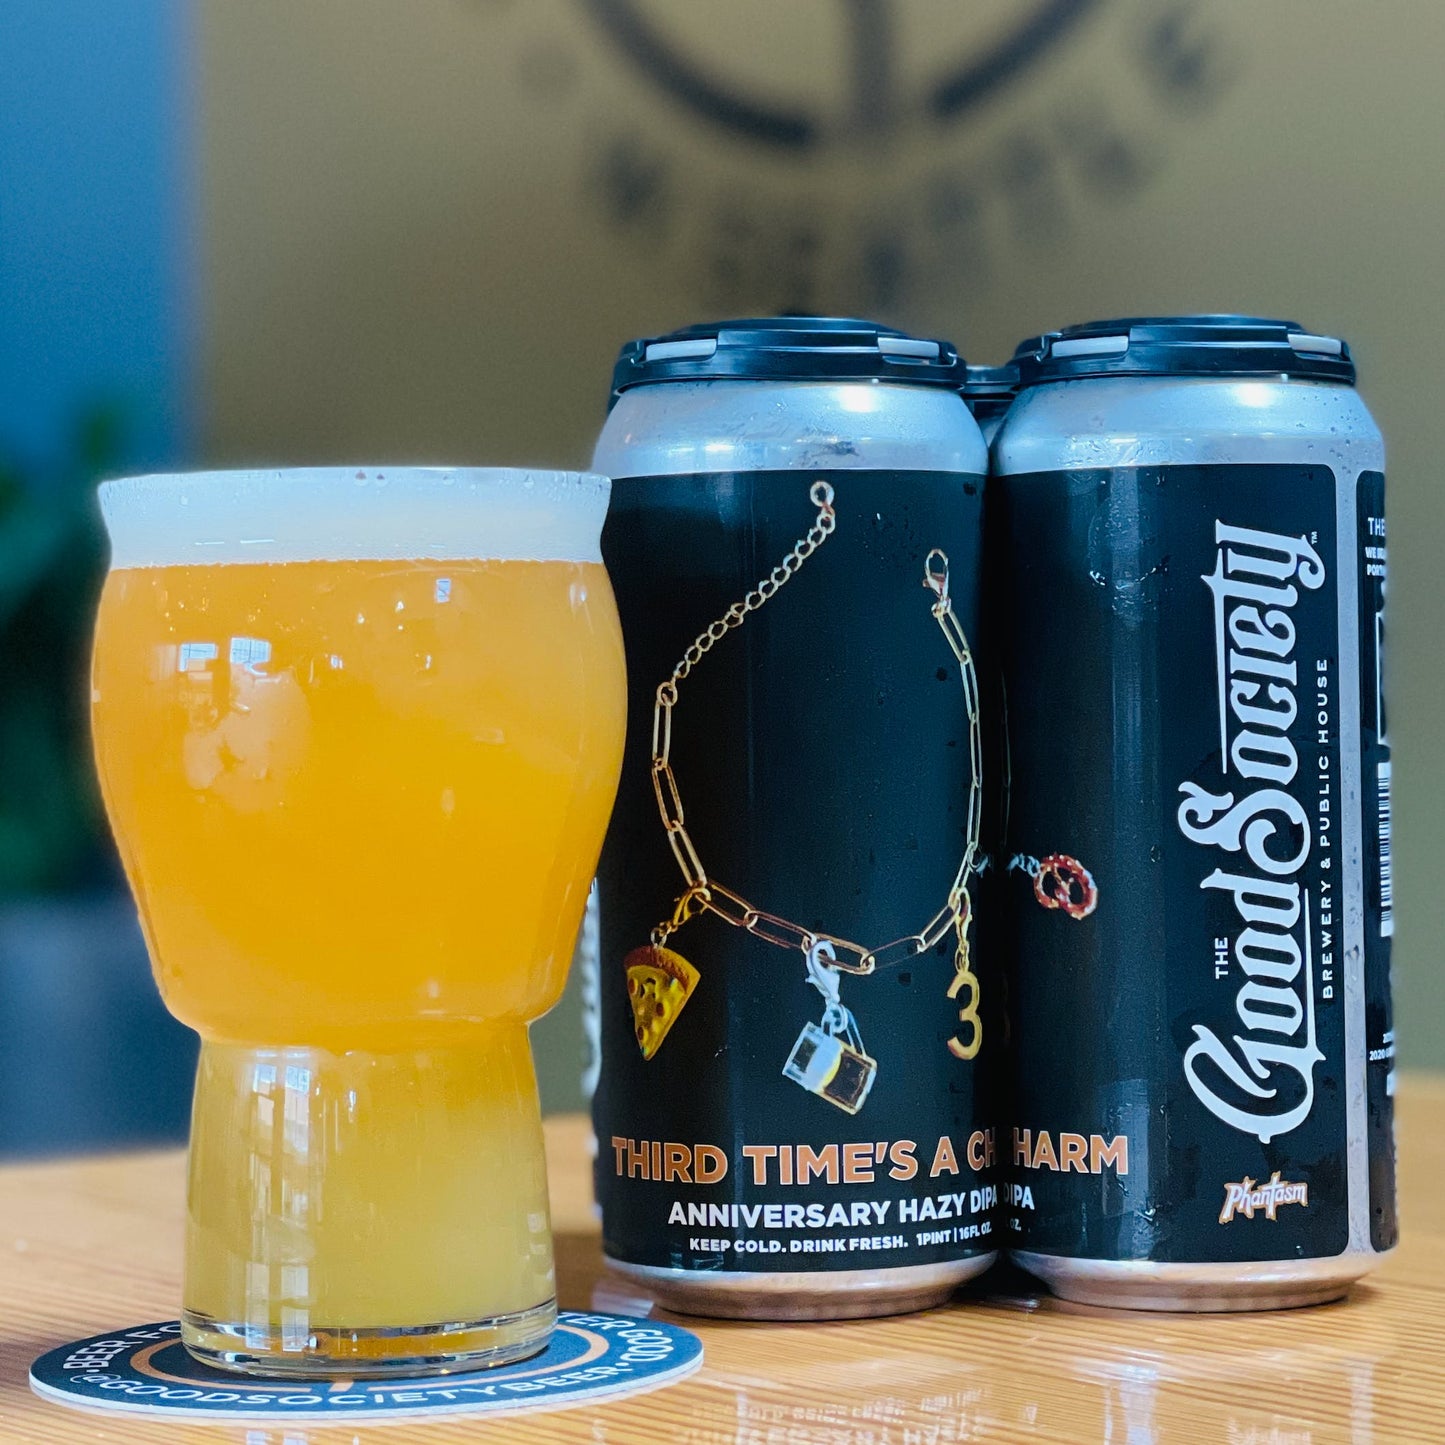 Third Time's a Charm Double IPA